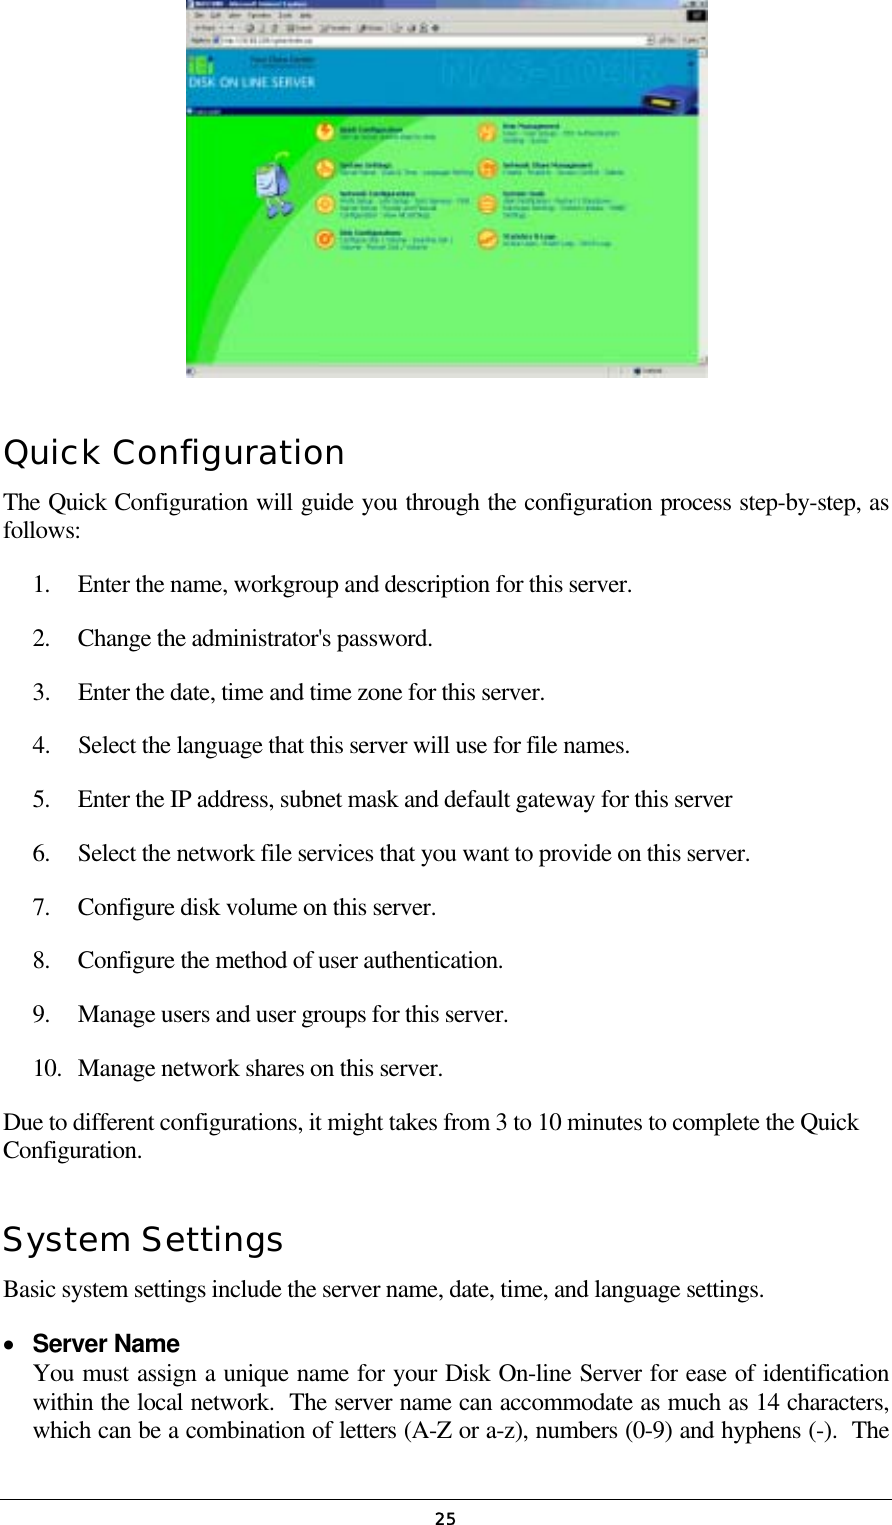   25 Quick Configuration The Quick Configuration will guide you through the configuration process step-by-step, as follows: 1.  Enter the name, workgroup and description for this server. 2.  Change the administrator&apos;s password. 3.  Enter the date, time and time zone for this server. 4.  Select the language that this server will use for file names. 5.  Enter the IP address, subnet mask and default gateway for this server 6.  Select the network file services that you want to provide on this server. 7.  Configure disk volume on this server. 8.  Configure the method of user authentication. 9.  Manage users and user groups for this server. 10.  Manage network shares on this server. Due to different configurations, it might takes from 3 to 10 minutes to complete the Quick Configuration. System Settings Basic system settings include the server name, date, time, and language settings. •  Server Name You must assign a unique name for your Disk On-line Server for ease of identification within the local network.  The server name can accommodate as much as 14 characters, which can be a combination of letters (A-Z or a-z), numbers (0-9) and hyphens (-).  The 